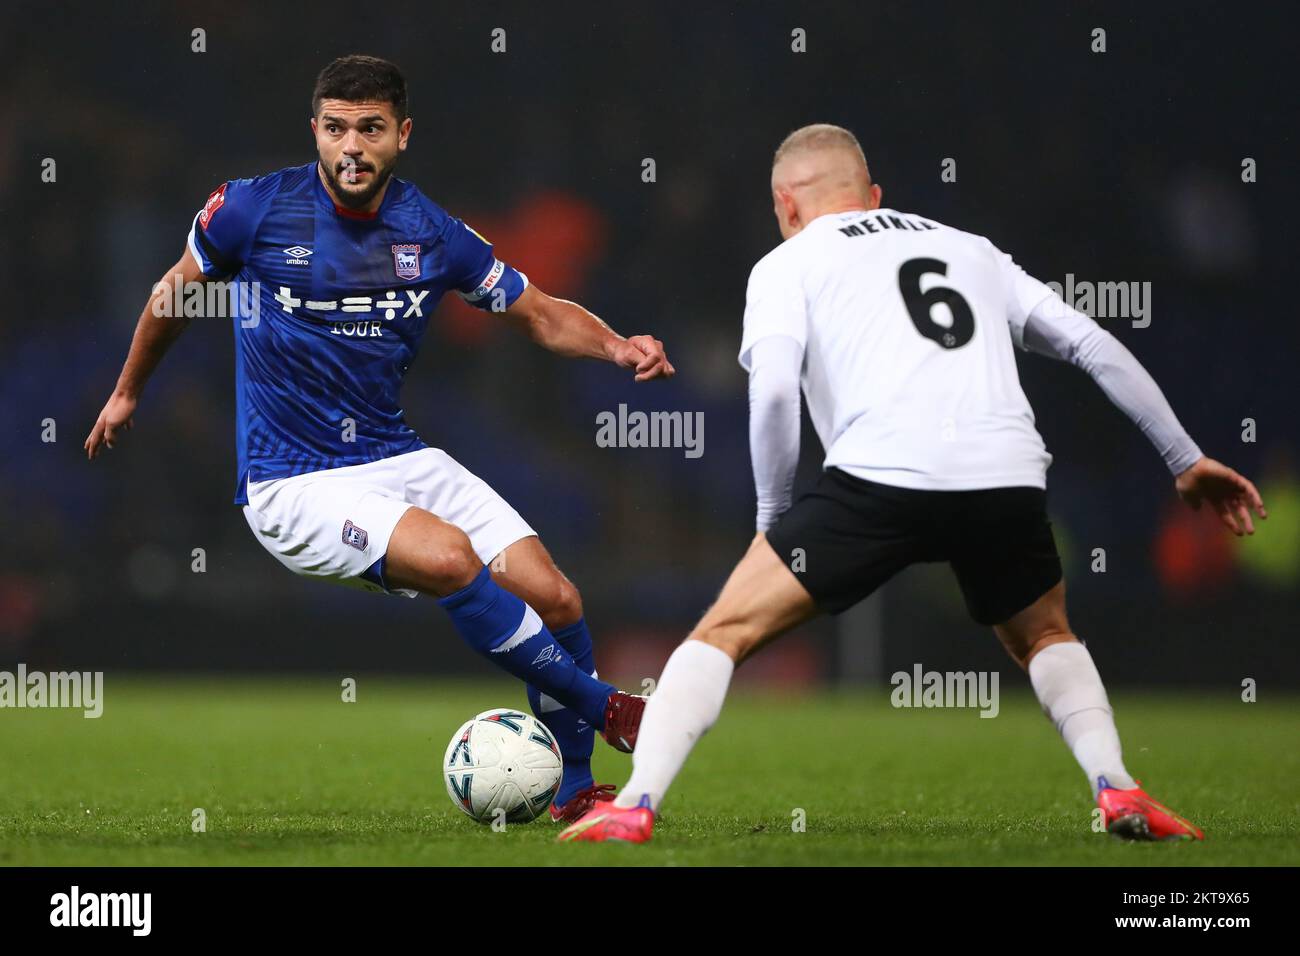 Sam Morsy of Ipswich Town and Lindon Meikle of Buxton - Ipswich Town v Buxton, The Emirates FA Cup second round, Portman Road, Ipswich, UK - 27th November 2022  Editorial Use Only - DataCo restrictions apply Stock Photo